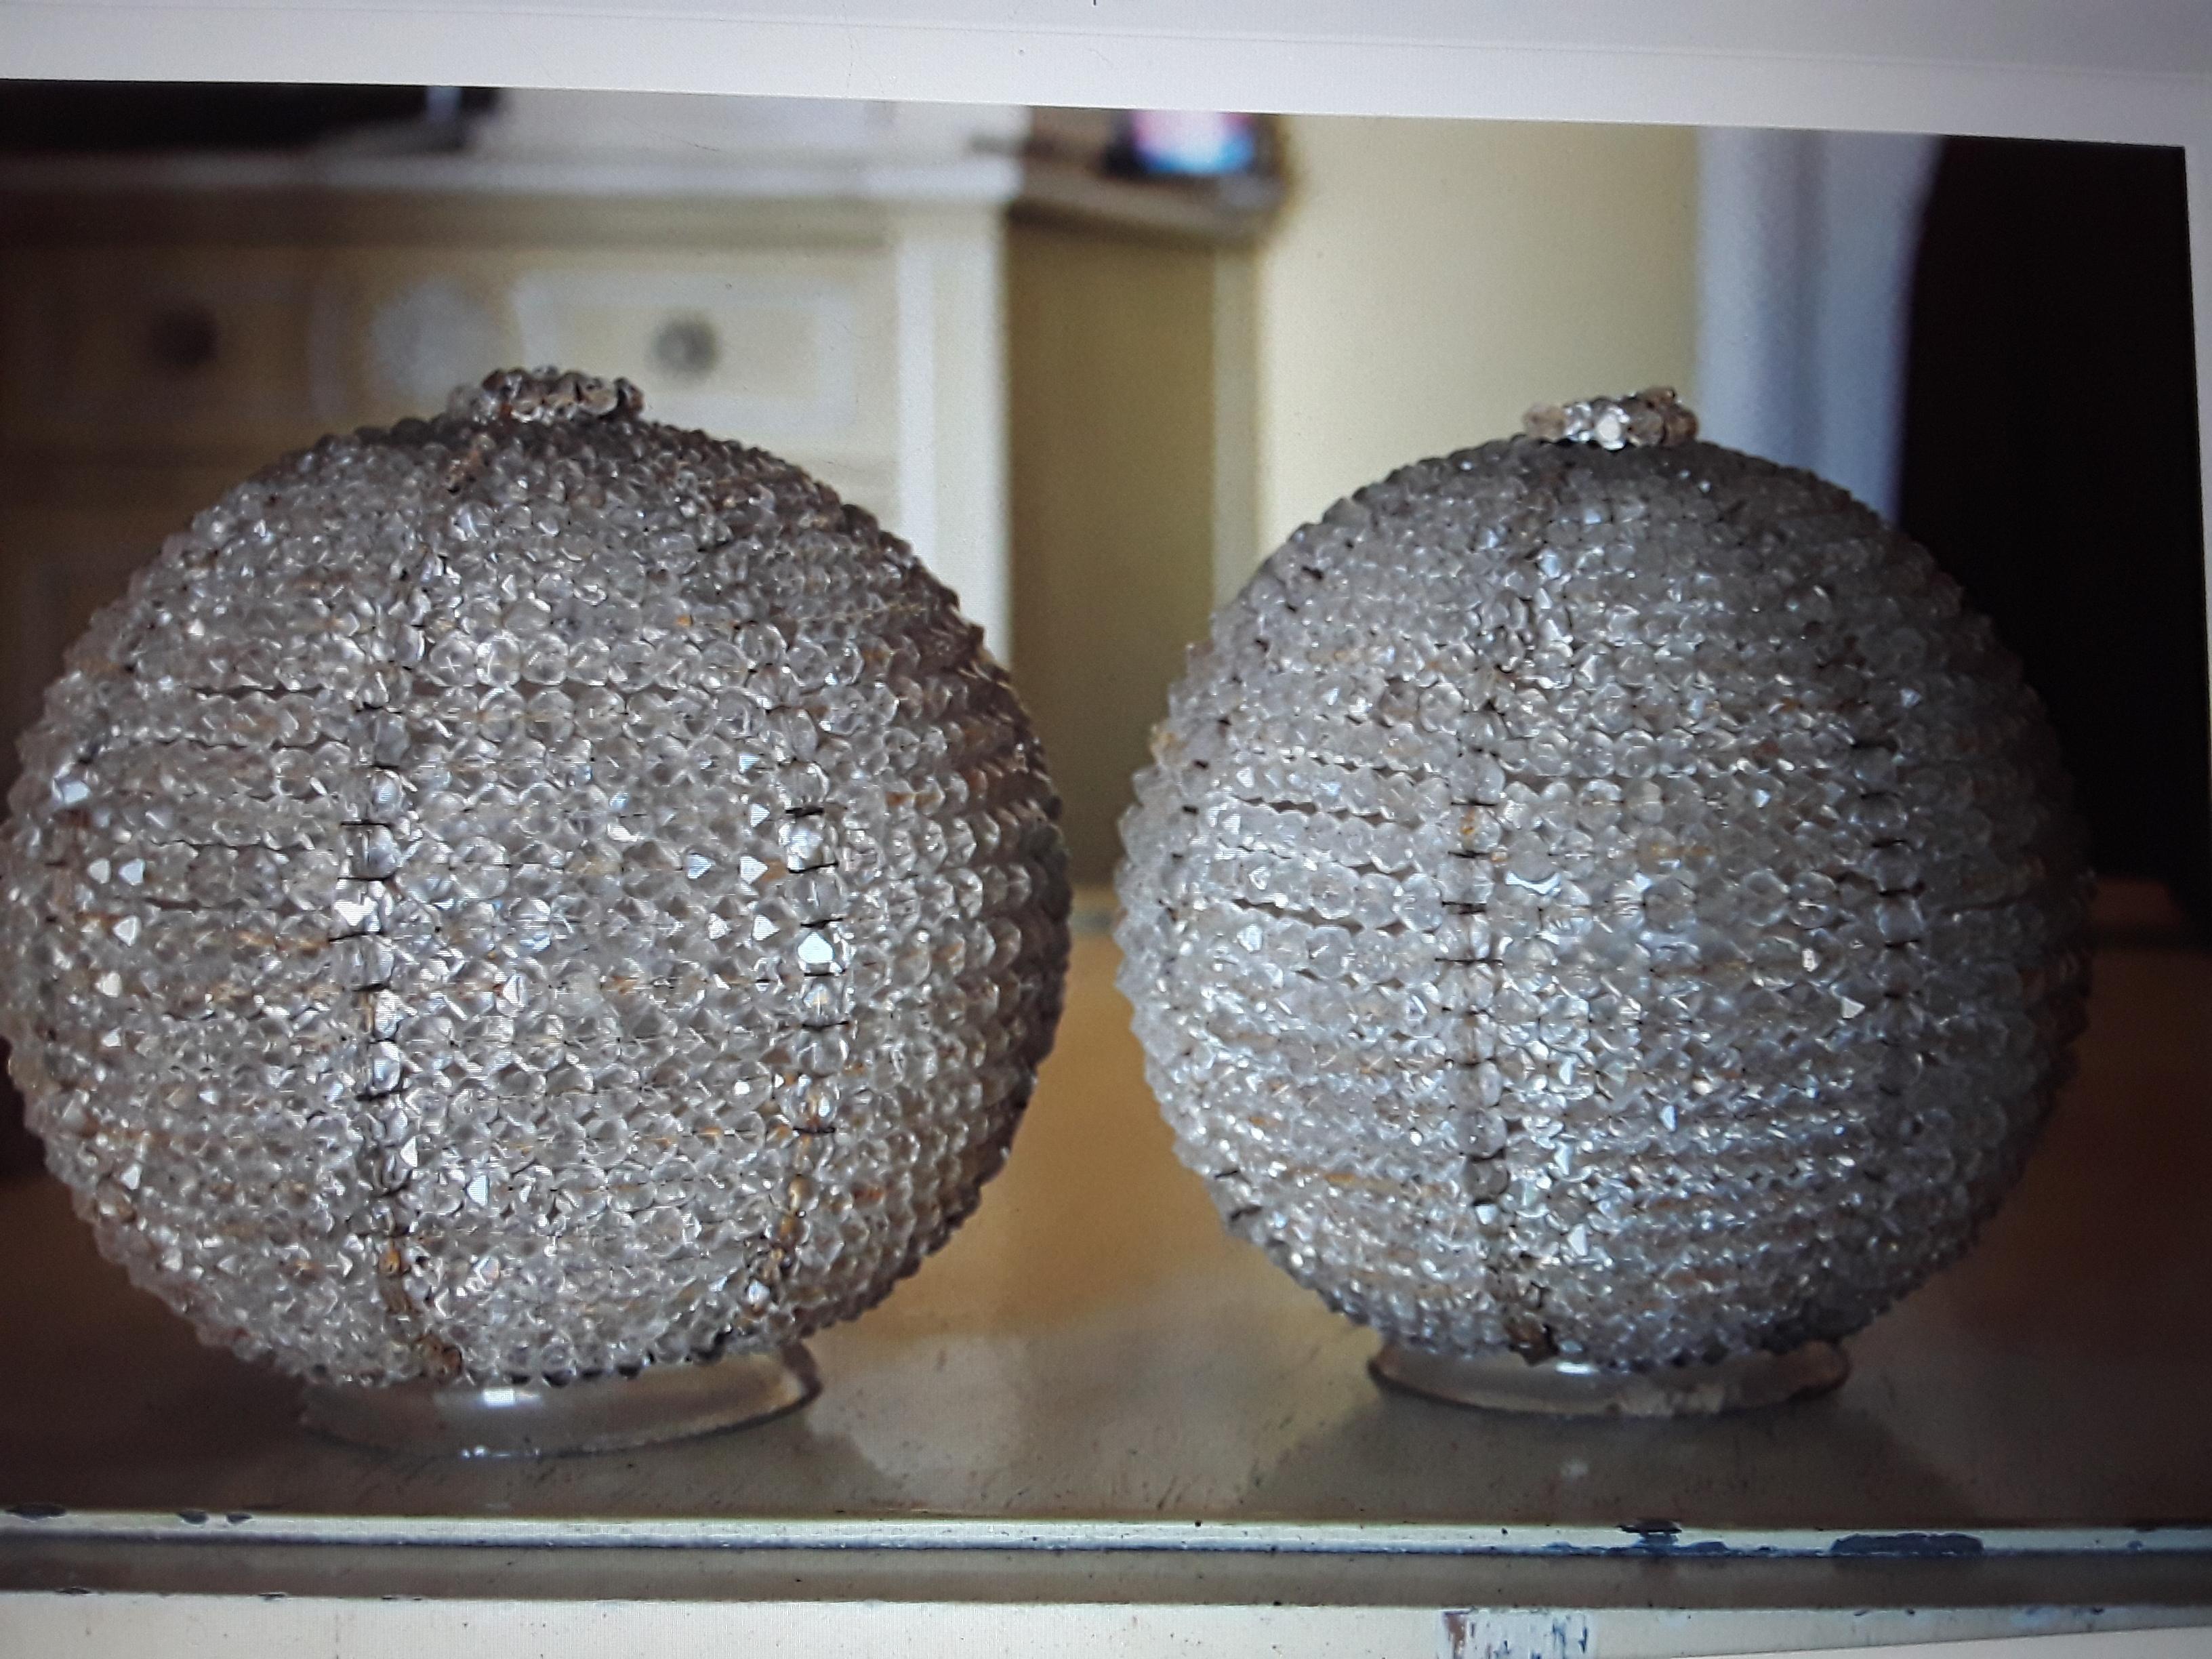 Set of 2 1920's Antique Art Deco Pefectly Crystal Beaded Lamp Shades - Large In Good Condition For Sale In Opa Locka, FL